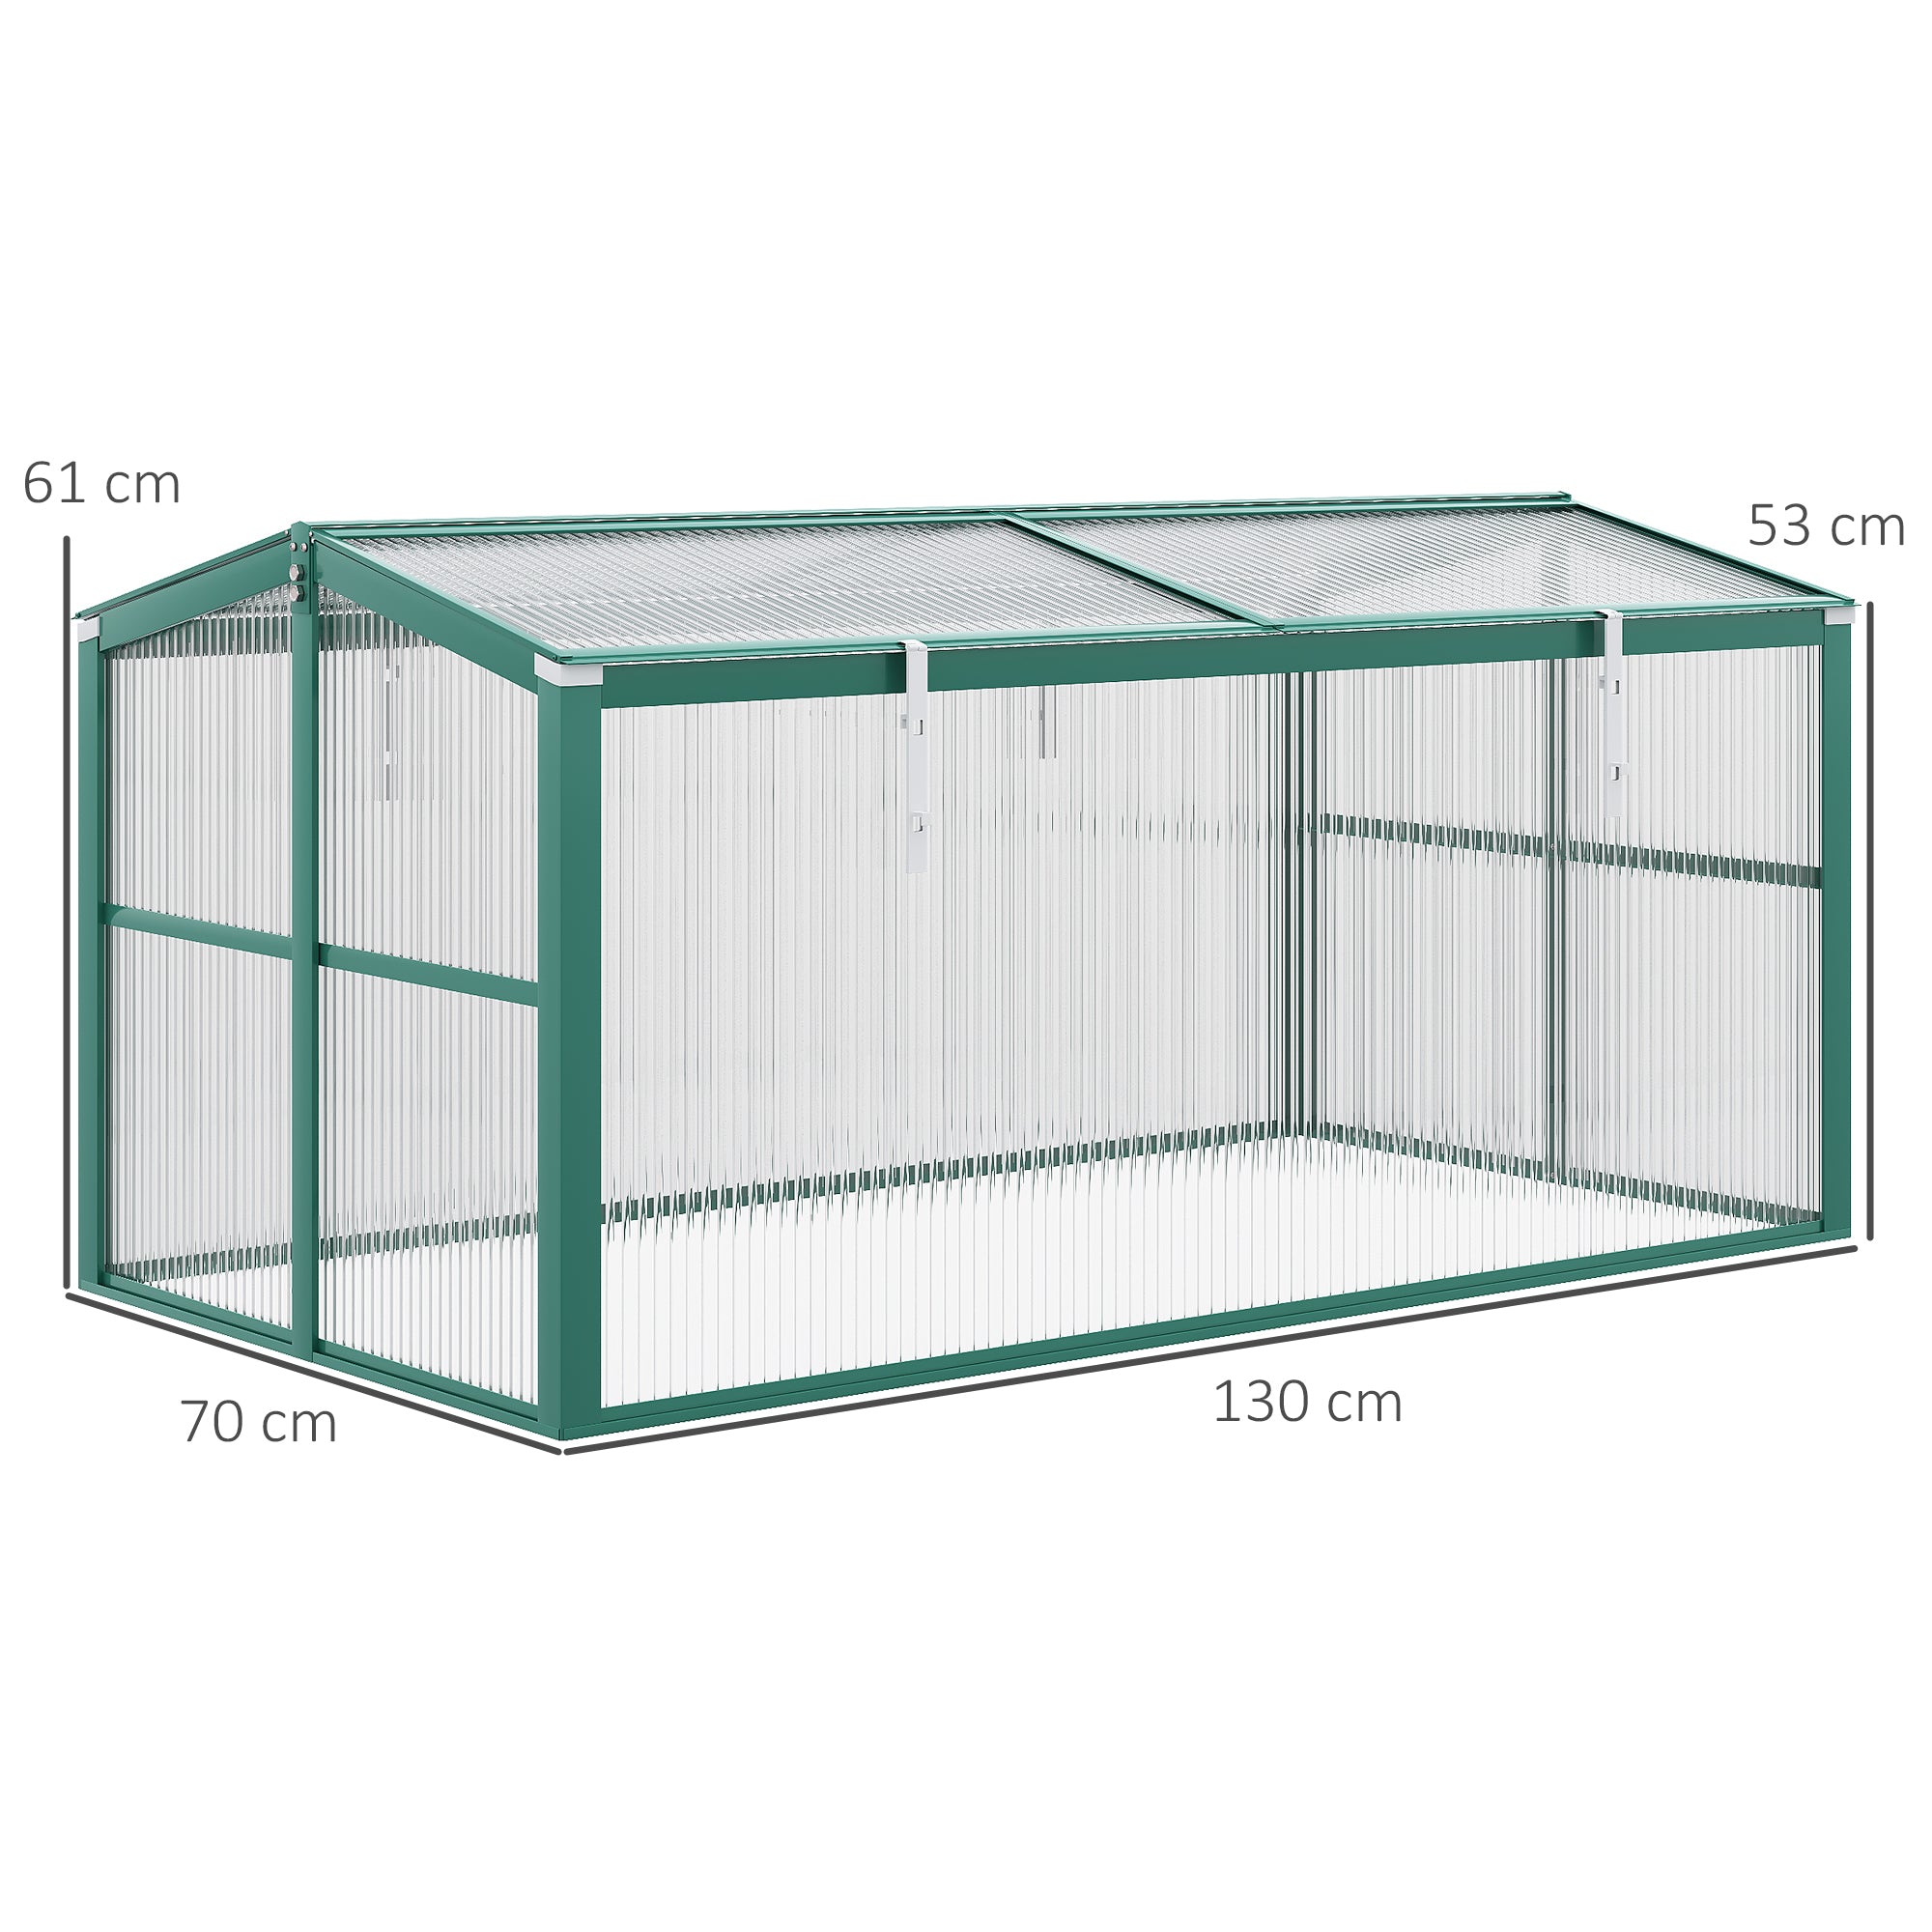 Outsunny Aluminium Polycarbonate Greenhouse Cold Frame Grow House, Openable Top for Flowers and Vegetables, 130x70x61cm